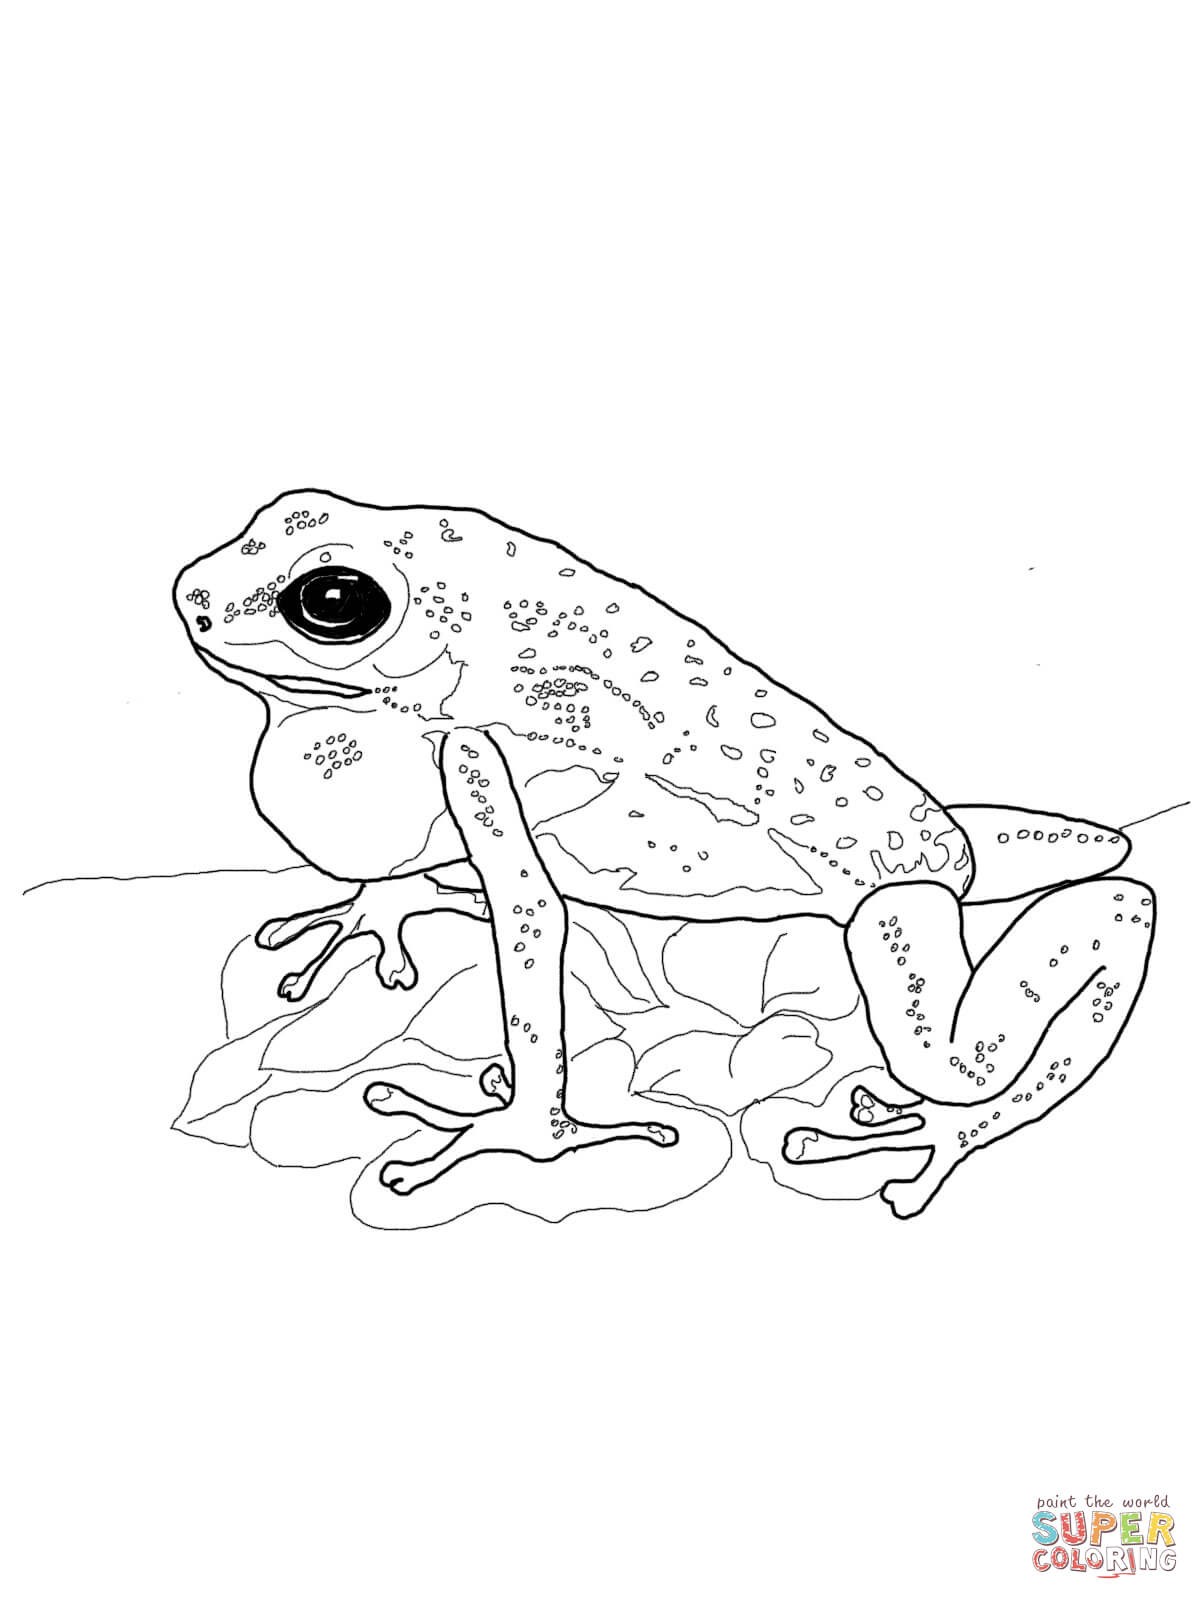 Strawberry Poison Dart Frog coloring page | Free Printable ...